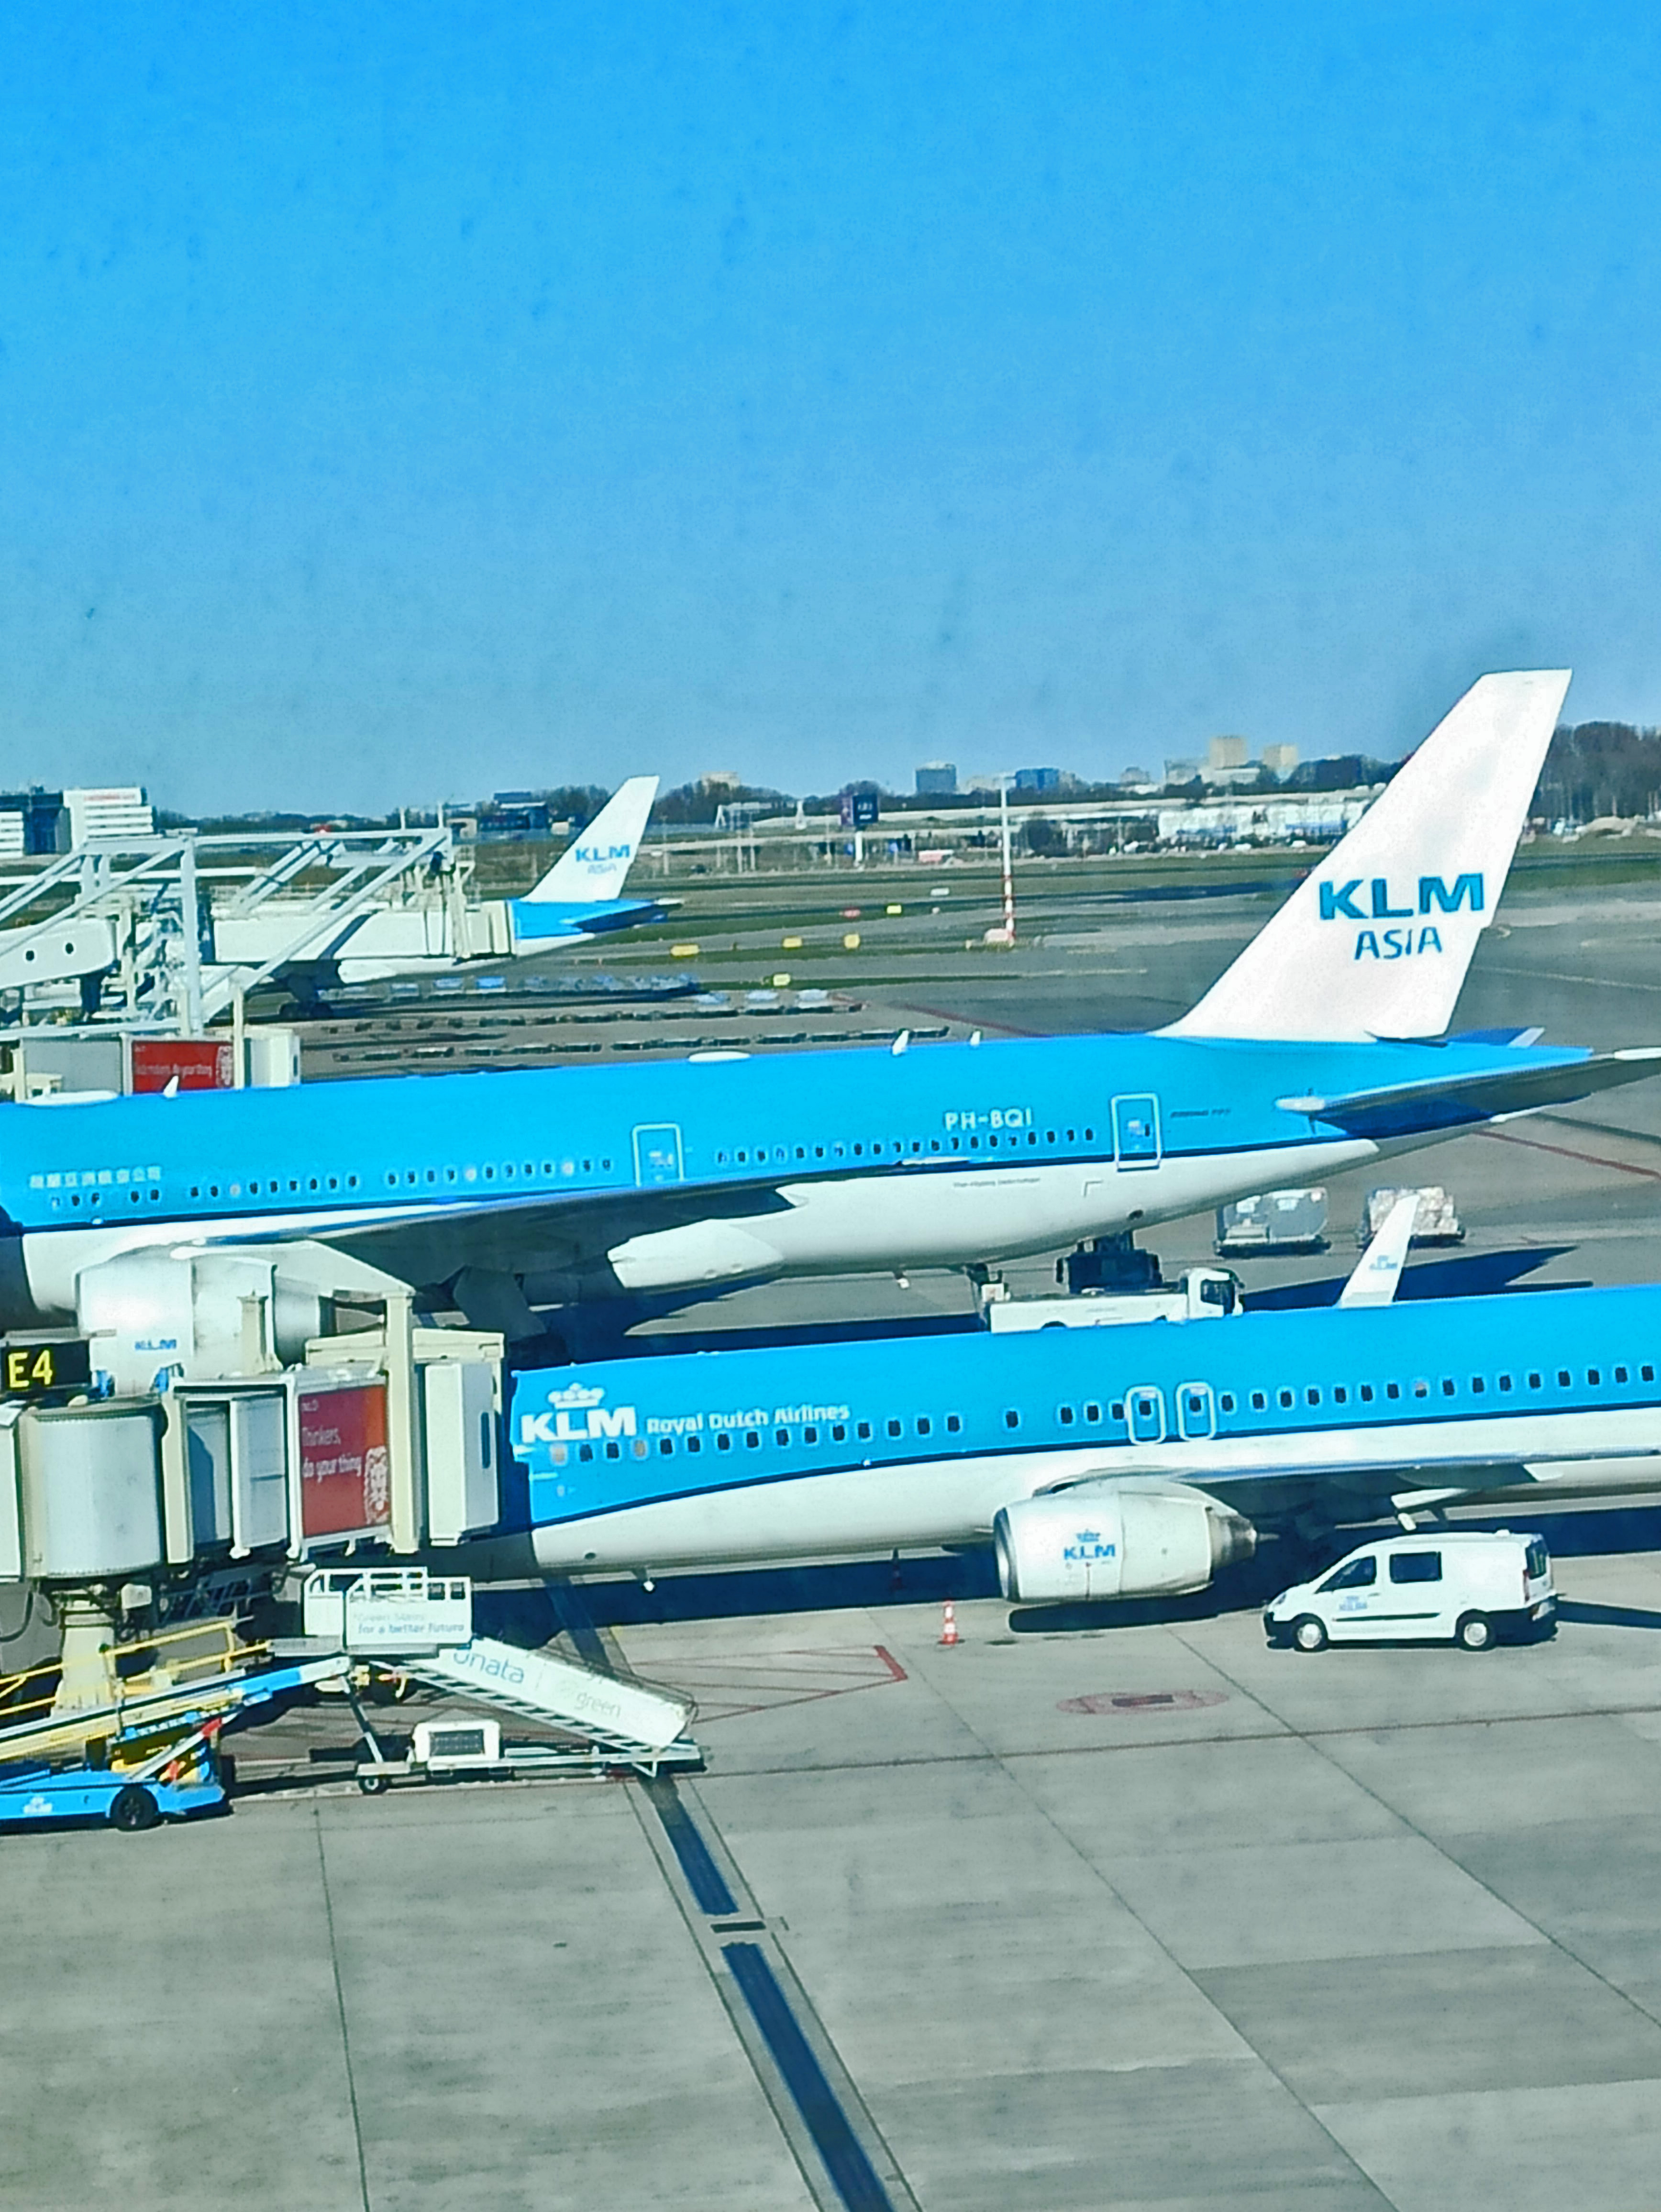 two KLM asia aircraft